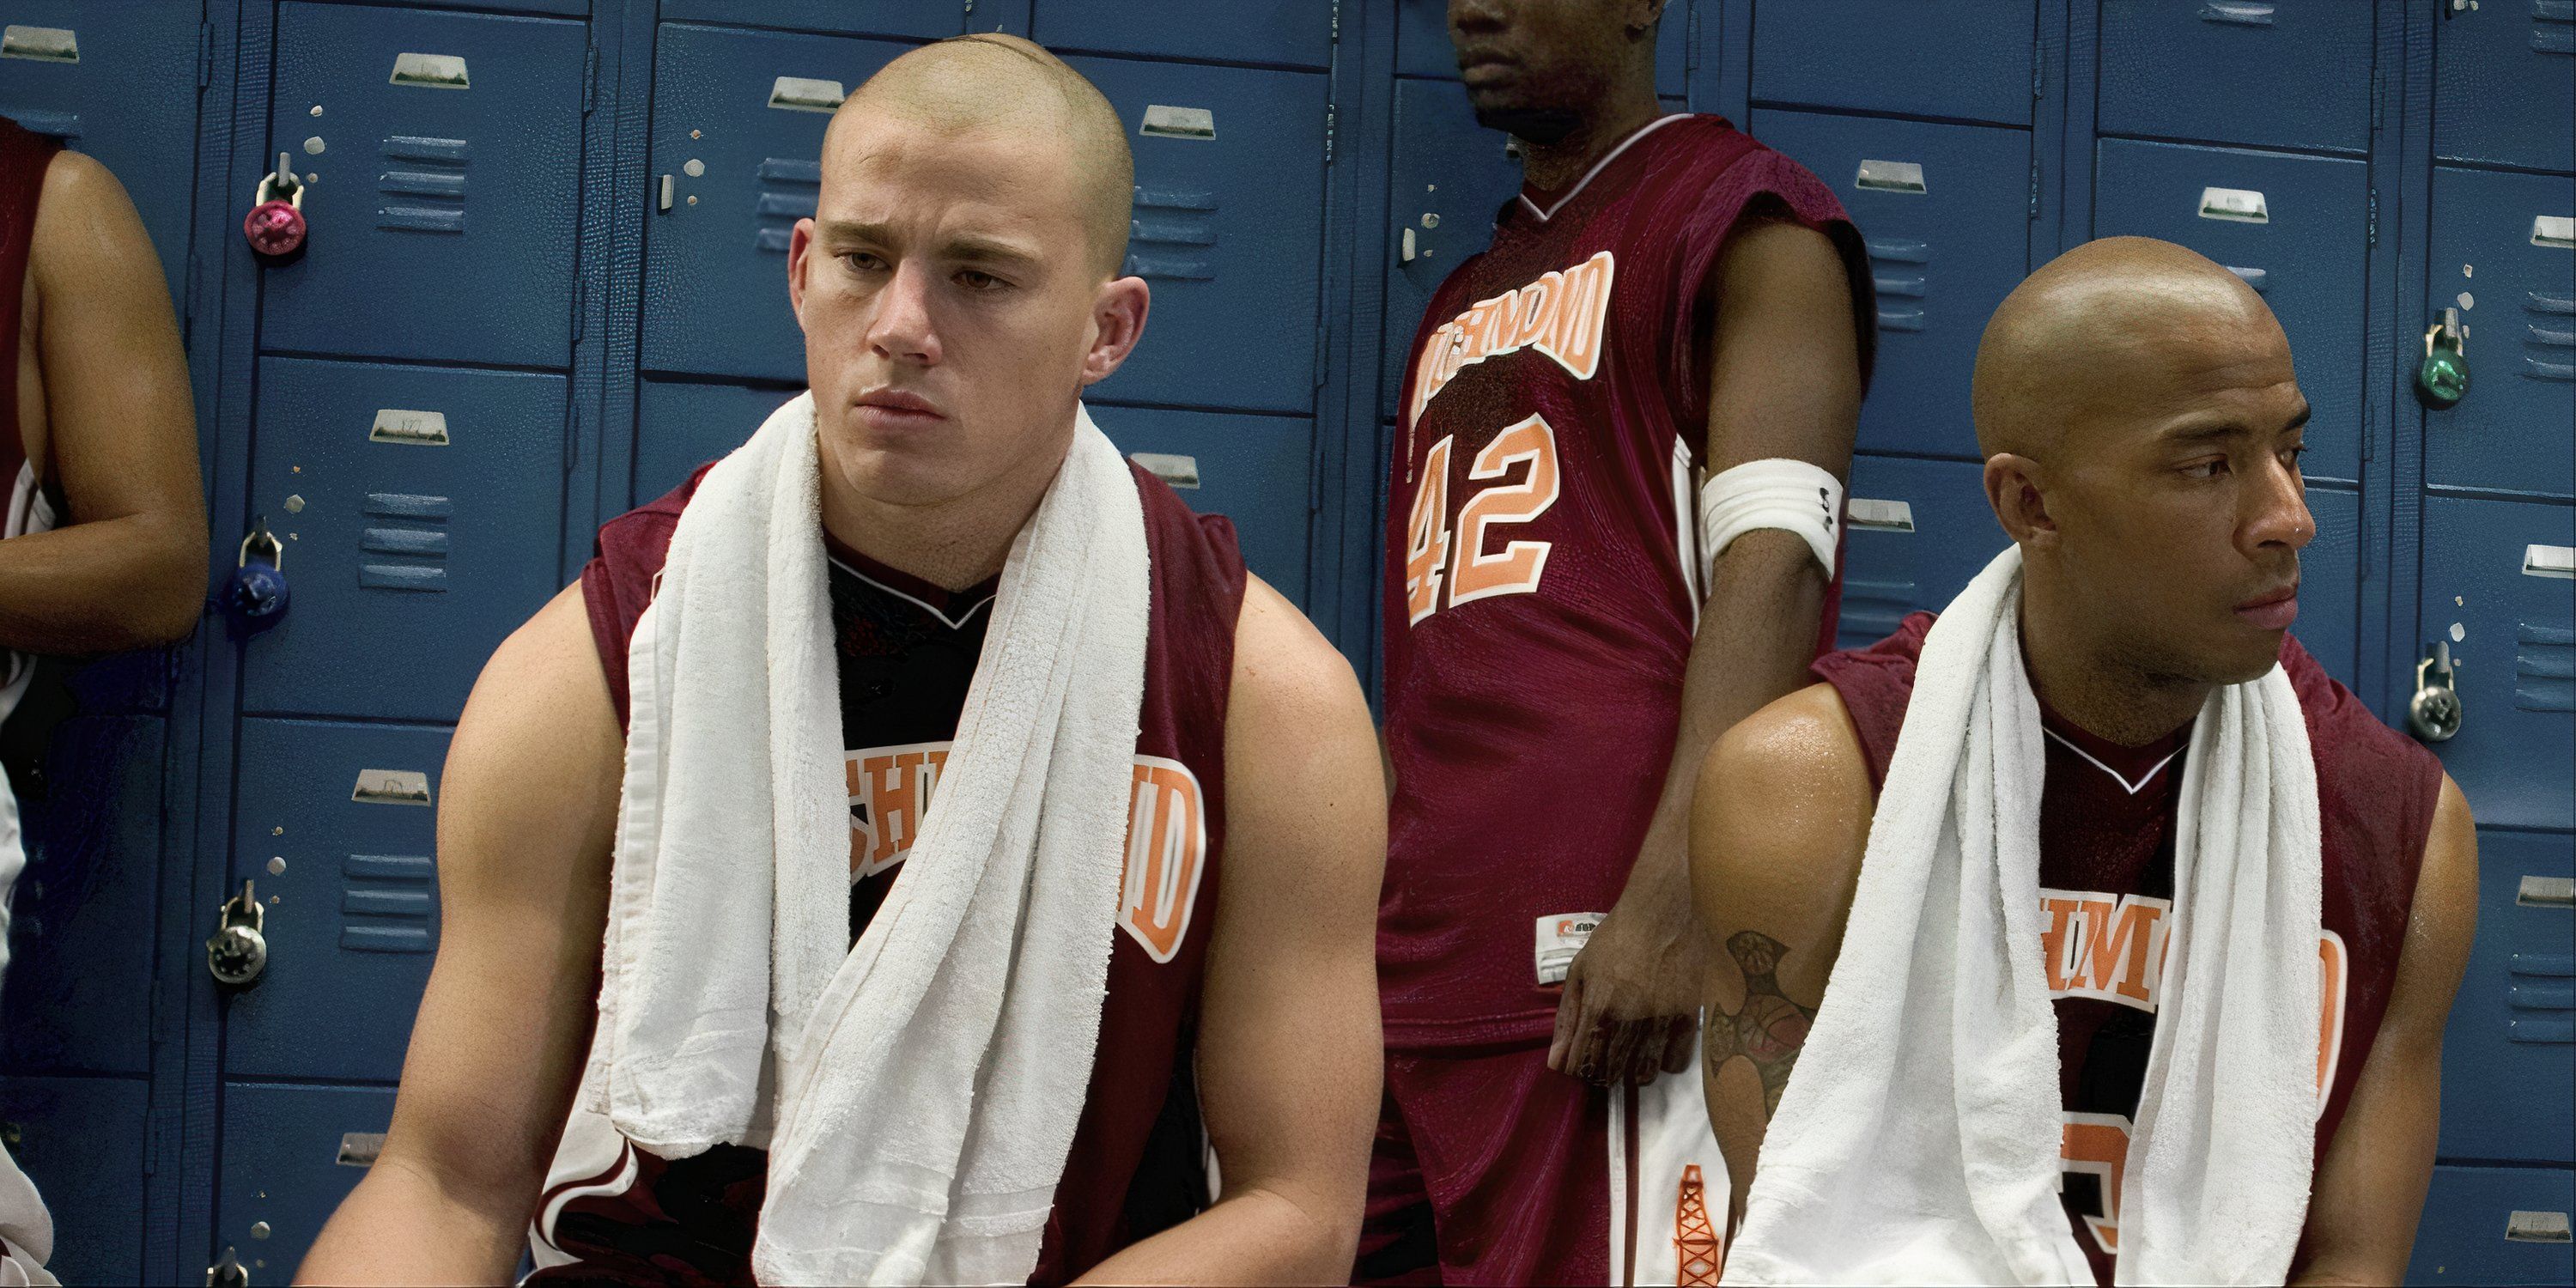 Channing Tatum as Jason Lyle sitting next to Antwon Tanner as Worm in the locker room in Coach Carter